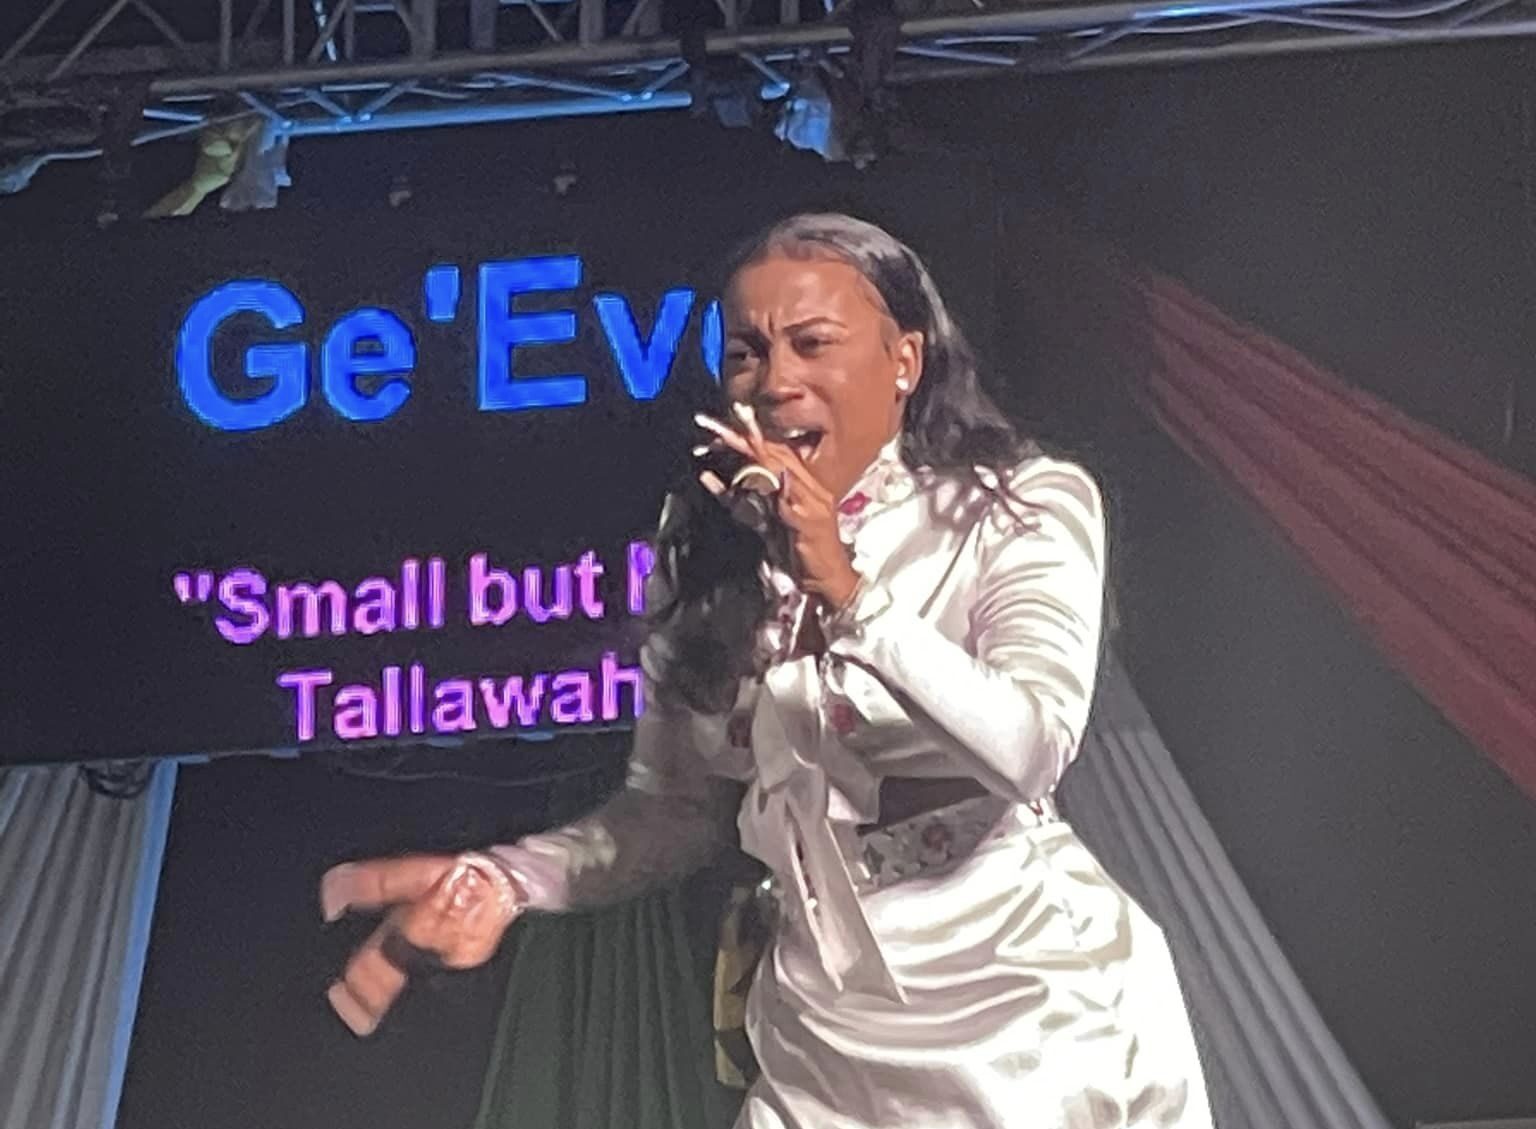 Antigua and Barbuda’s Ge’Eve Phillip shines in Regional Calypso Competition, TT’s Terri Lyons secures crown